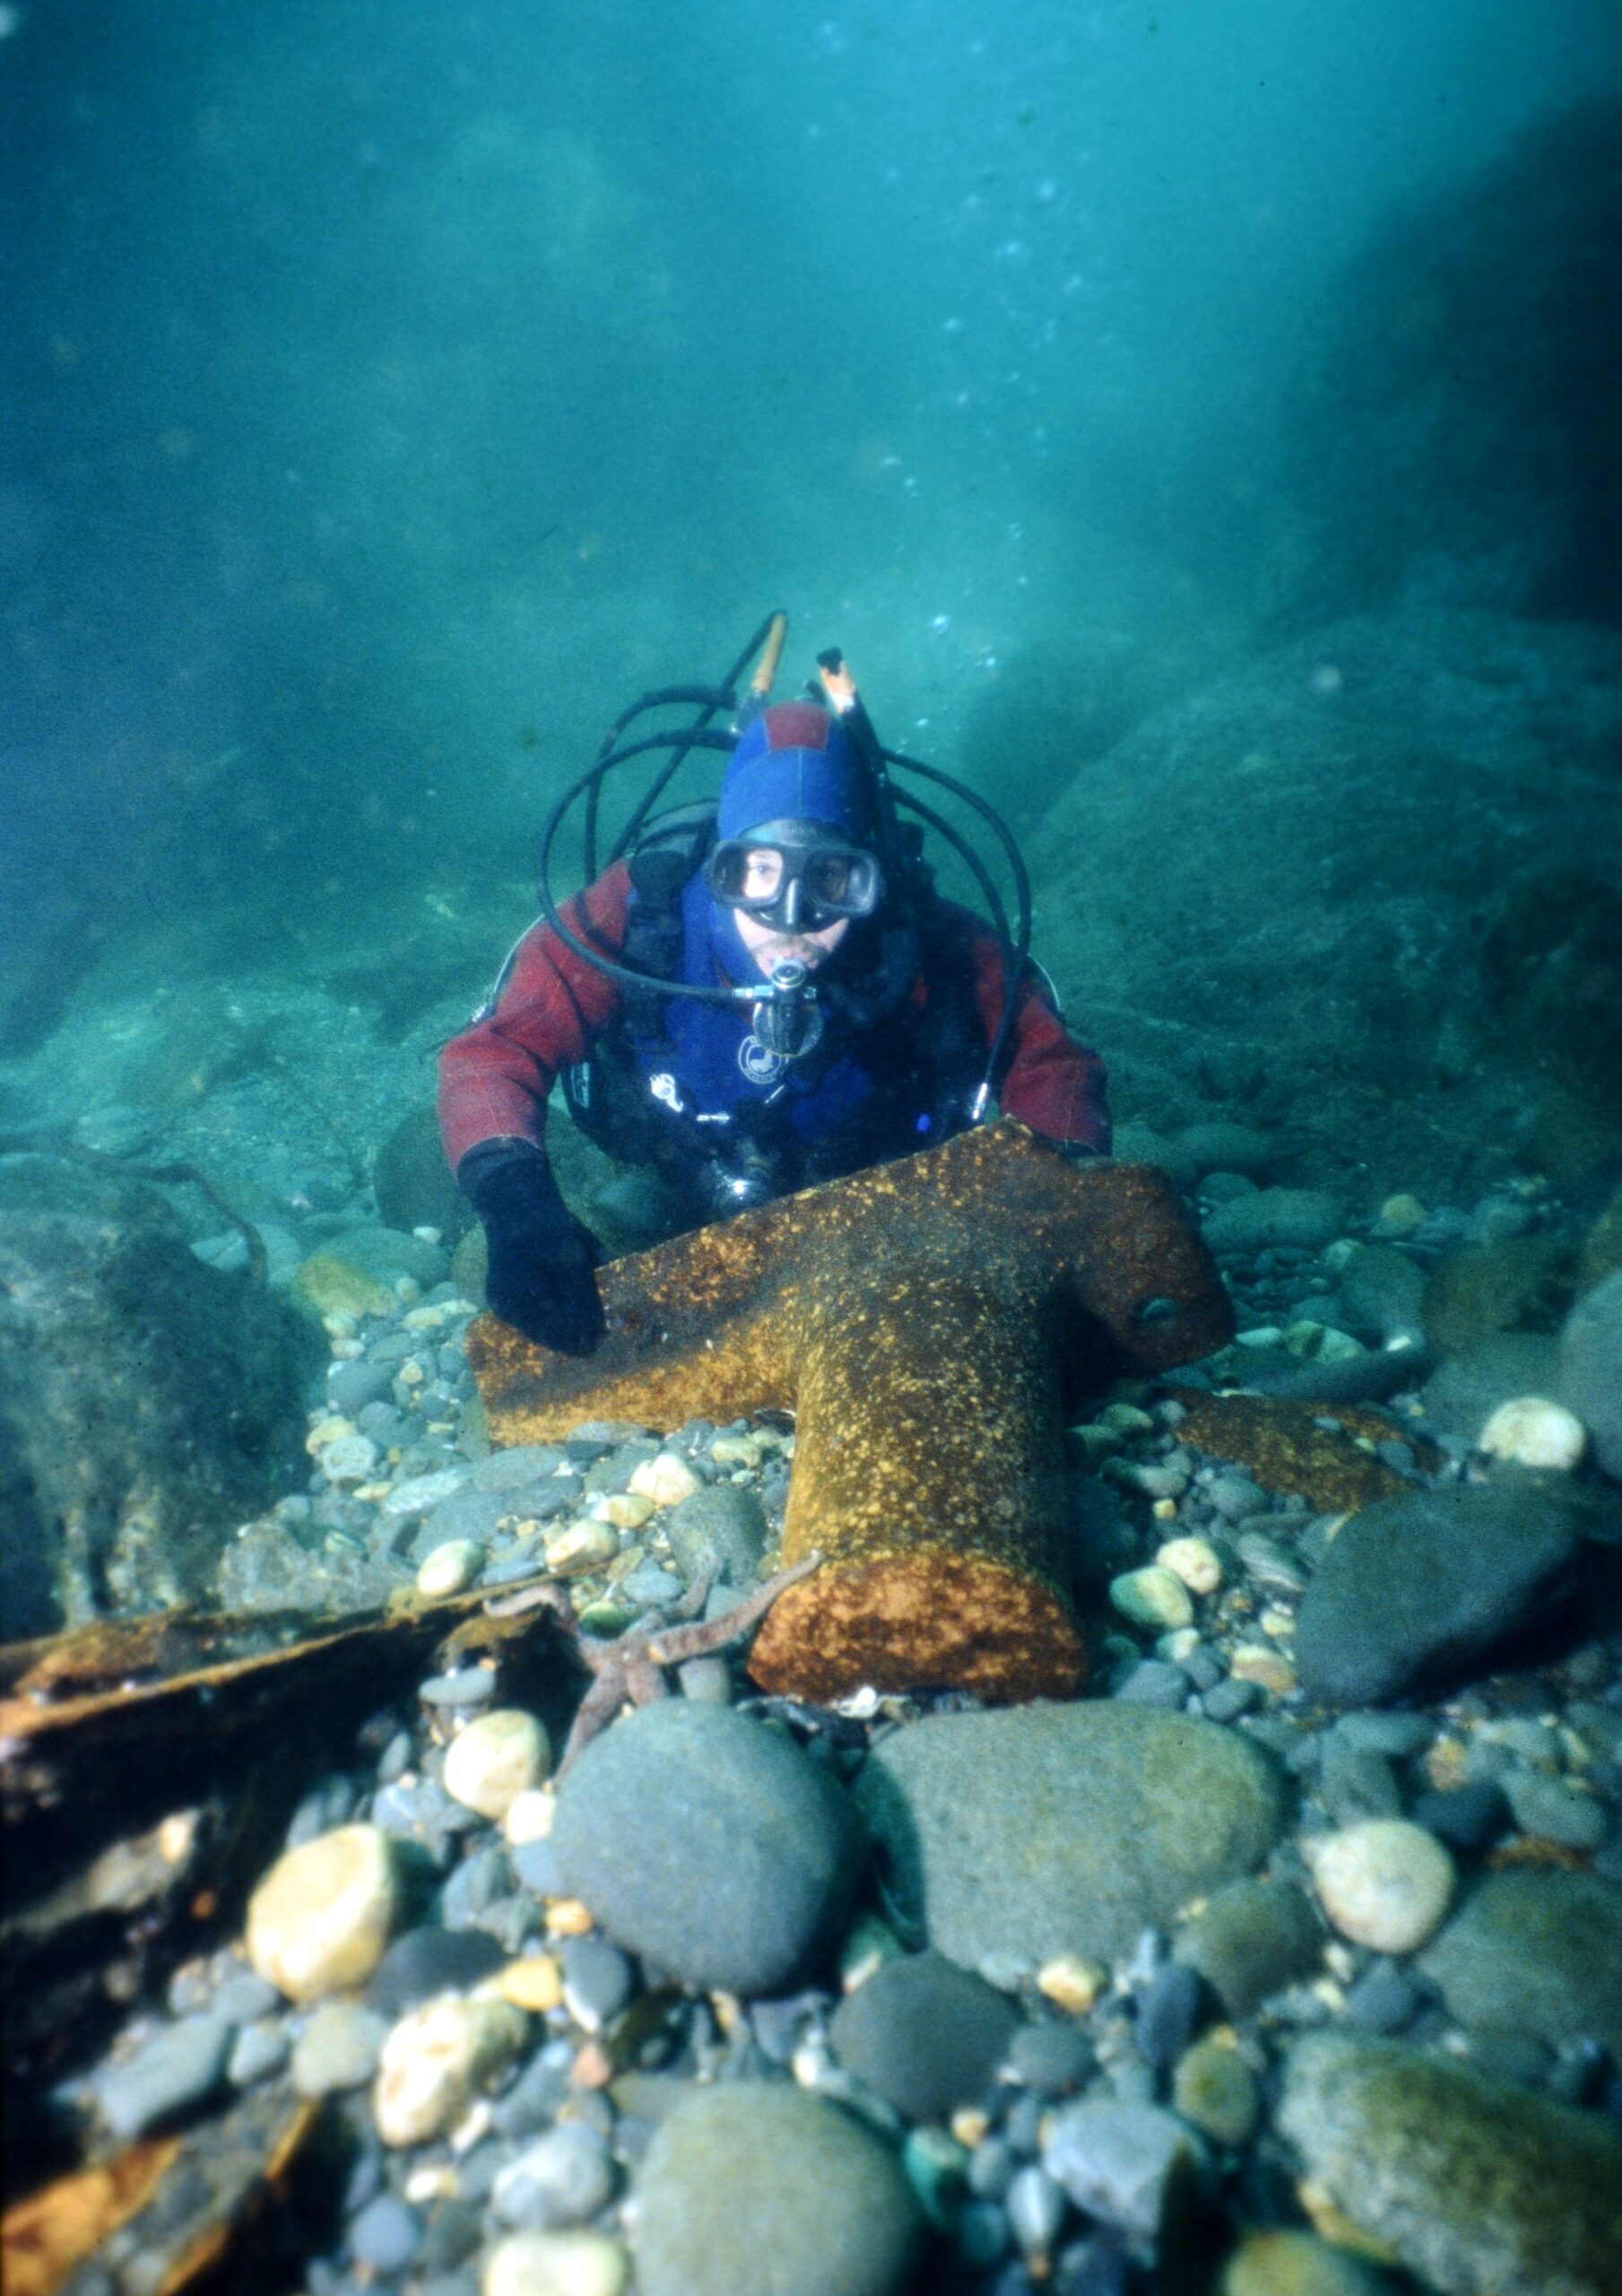 A UASBC diver poses next to a bollard from the Pass of Melfort